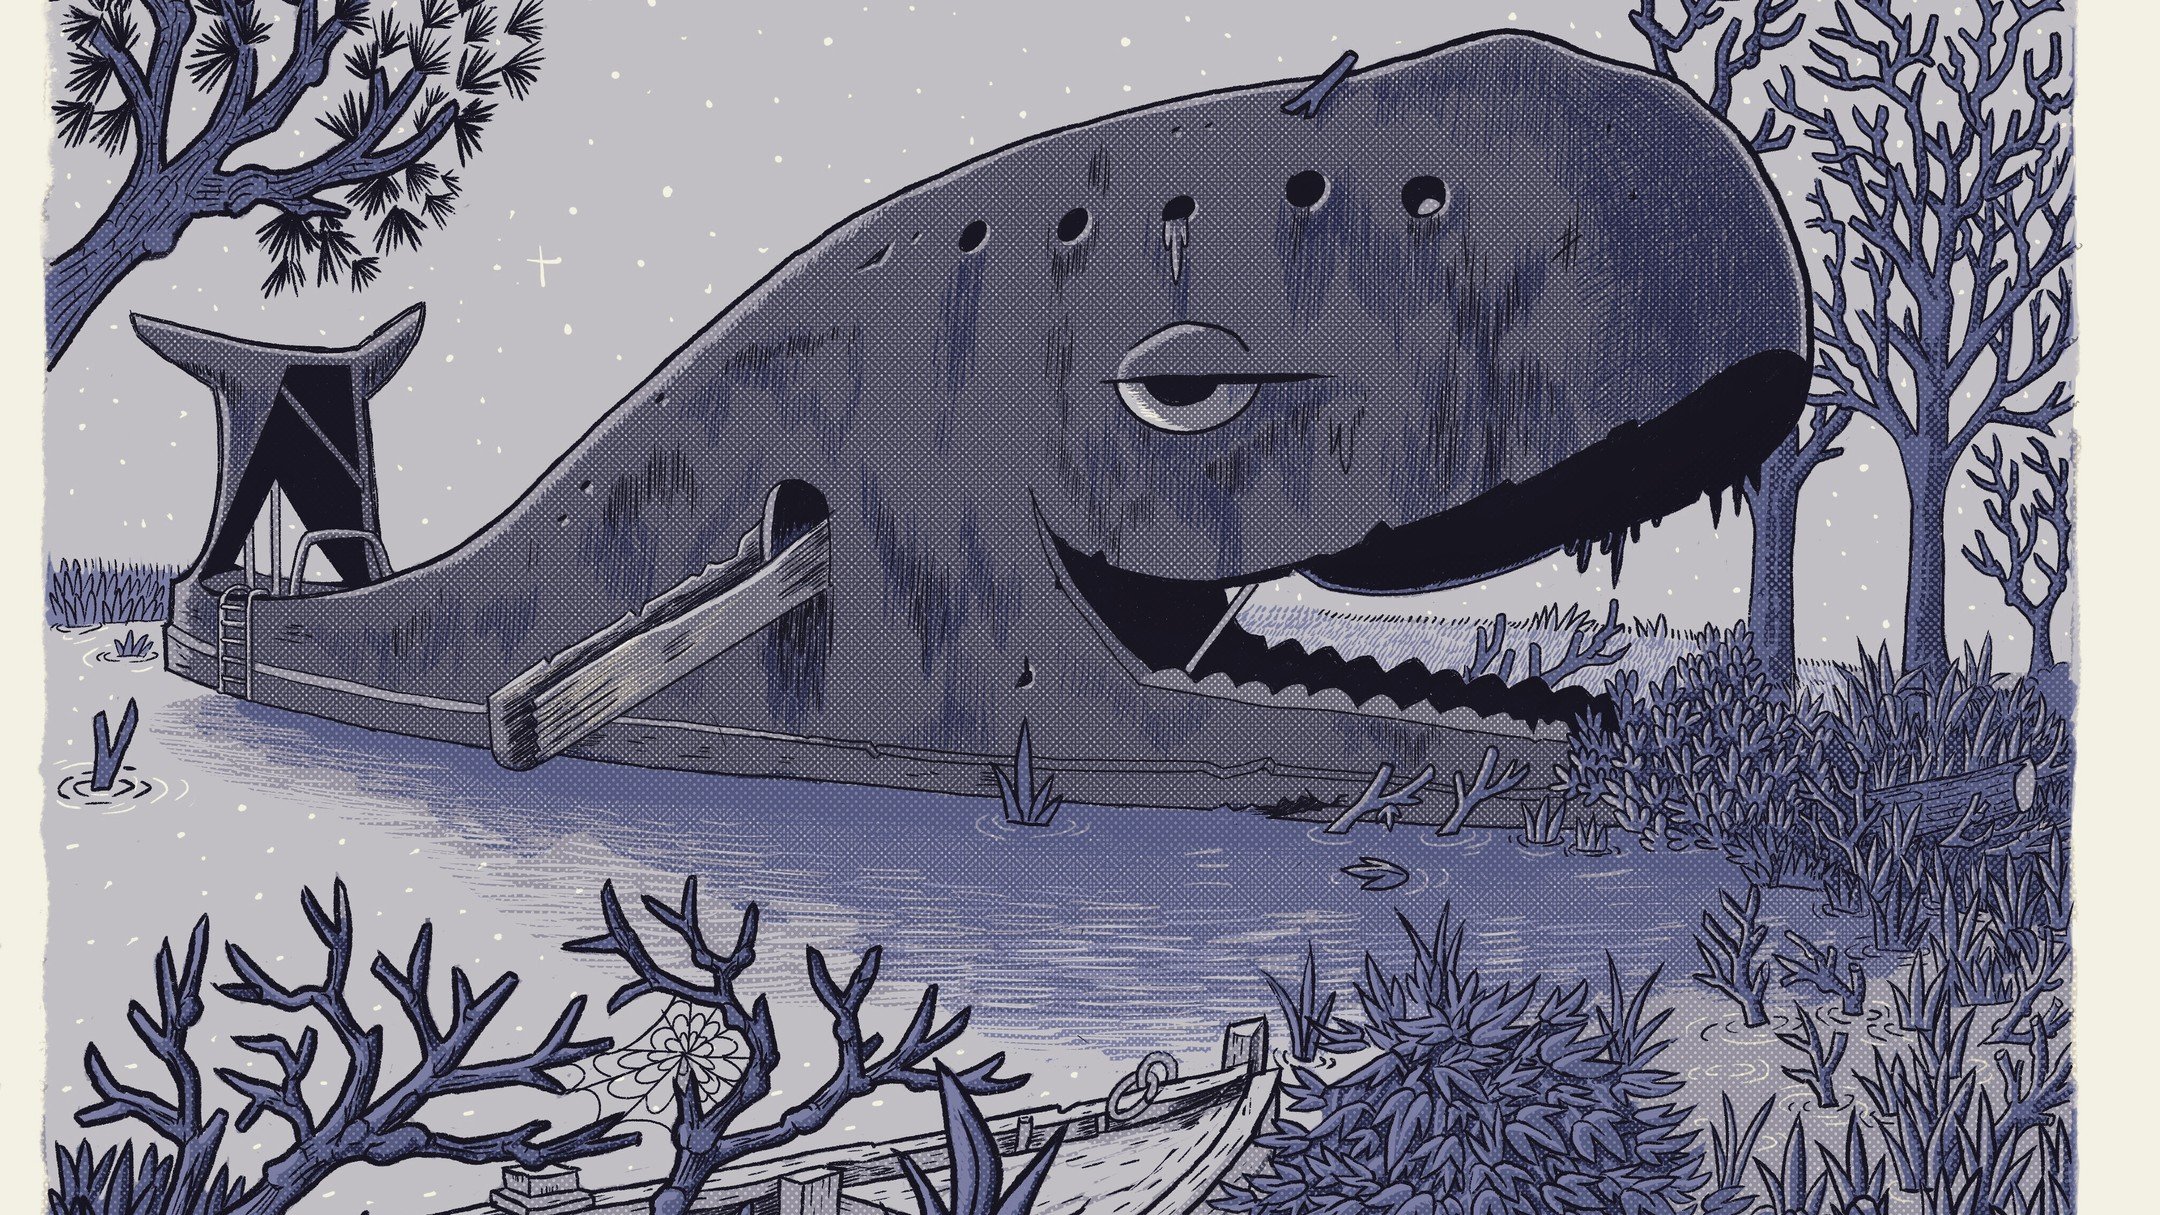 The Blue Whale of Catoosa at Night from my upcoming mini comic about submerged animatronics. #comics #bluewhaleofcatoosa #animatronics #submergedanimatronics #illustration #rt66 #catoosa #drawing #illustration #whale